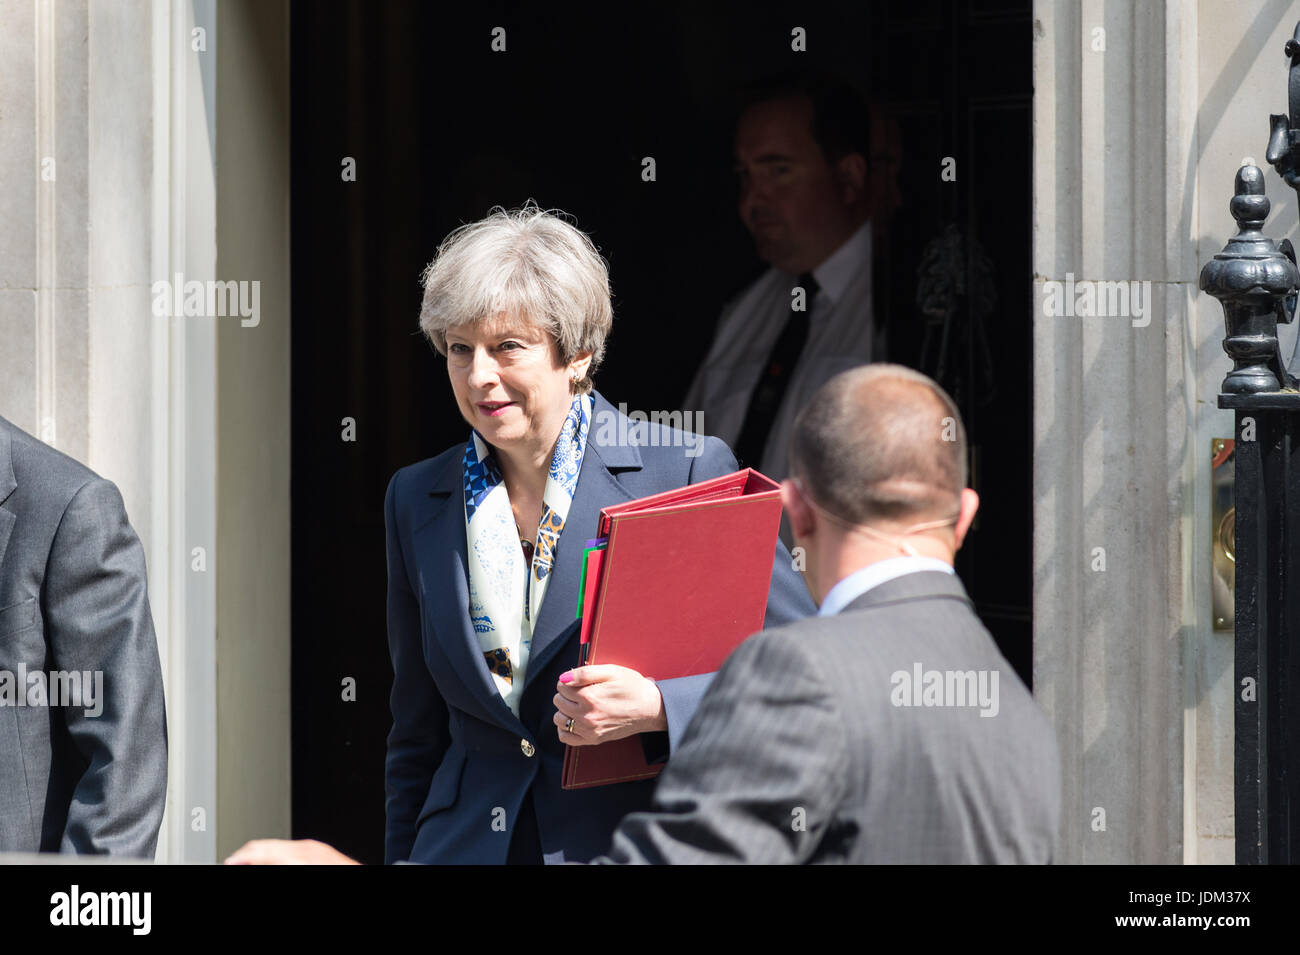 London, UK. 21st June, 2017. British Prime Minister Theresa May leaves 10 Downing Street for the State Opening of Parliament and the Queen's Speech, which sets out the Government's agenda for the new parliamentary session. Credit: Wiktor Szymanowicz/Alamy Live News Stock Photo